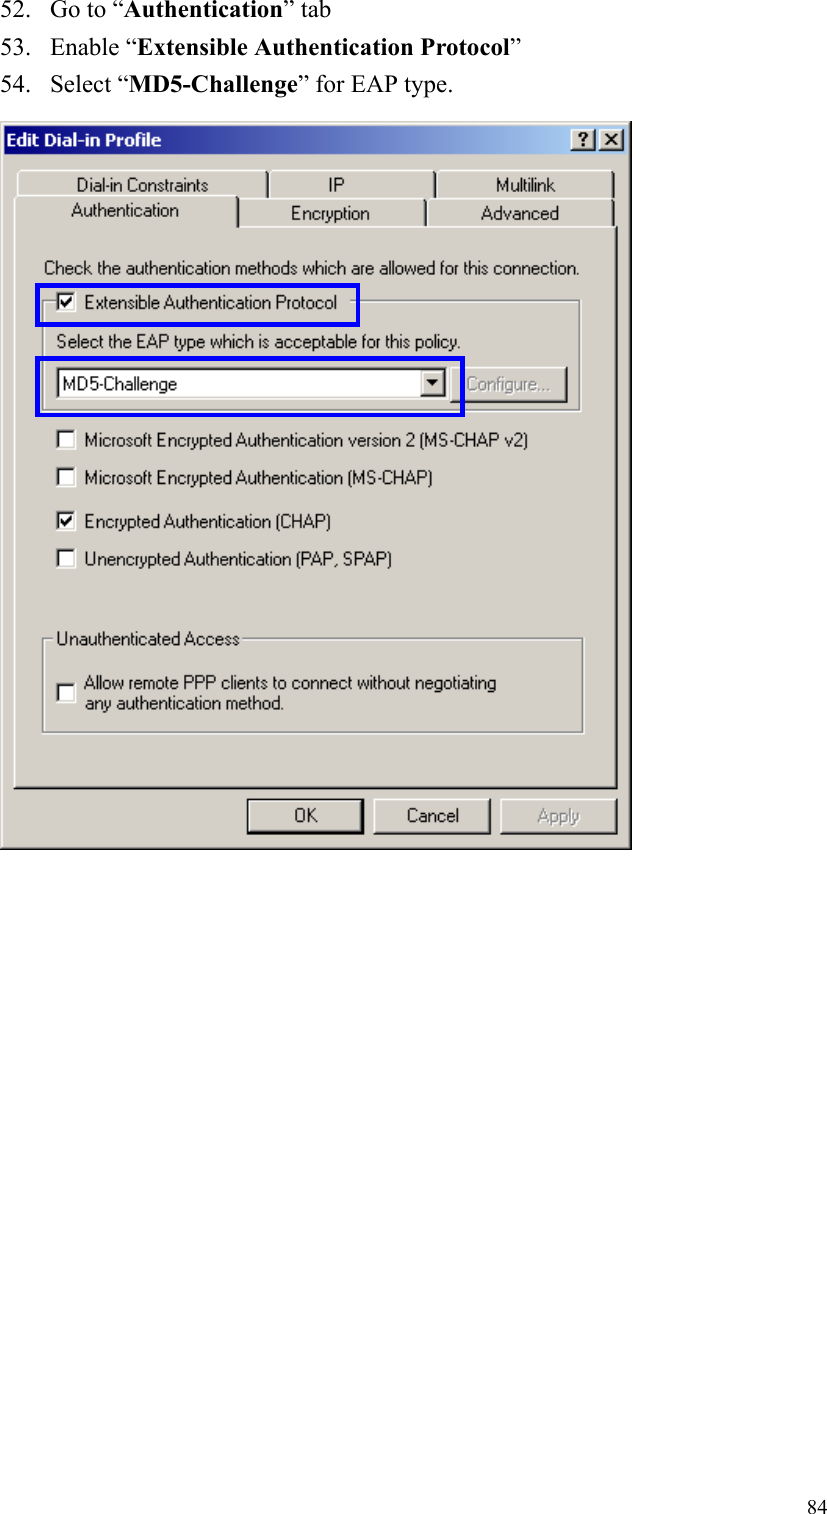 8452. Go to “Authentication” tab53. Enable “Extensible Authentication Protocol”54. Select “MD5-Challenge” for EAP type.  